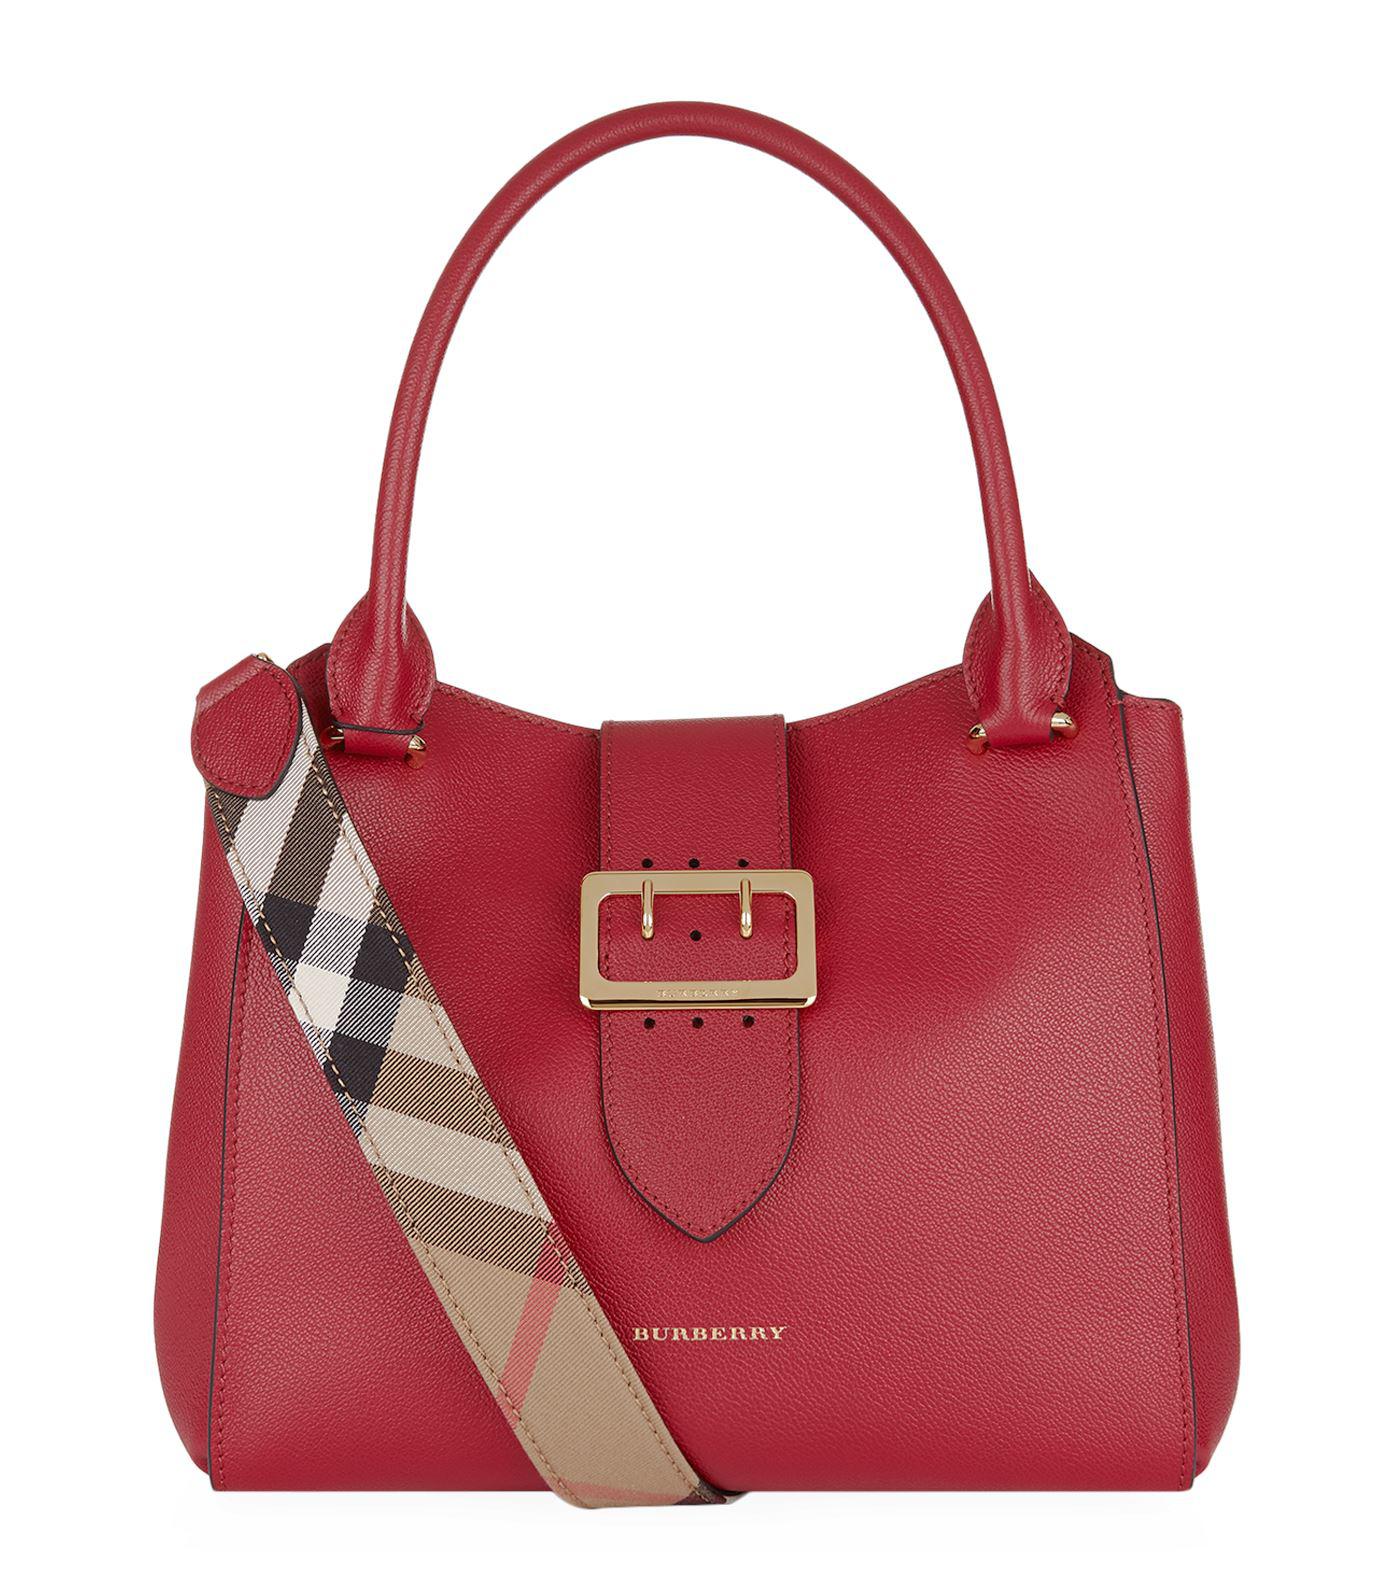 Burberry Leather Buckle Tote Bag in Red - Lyst